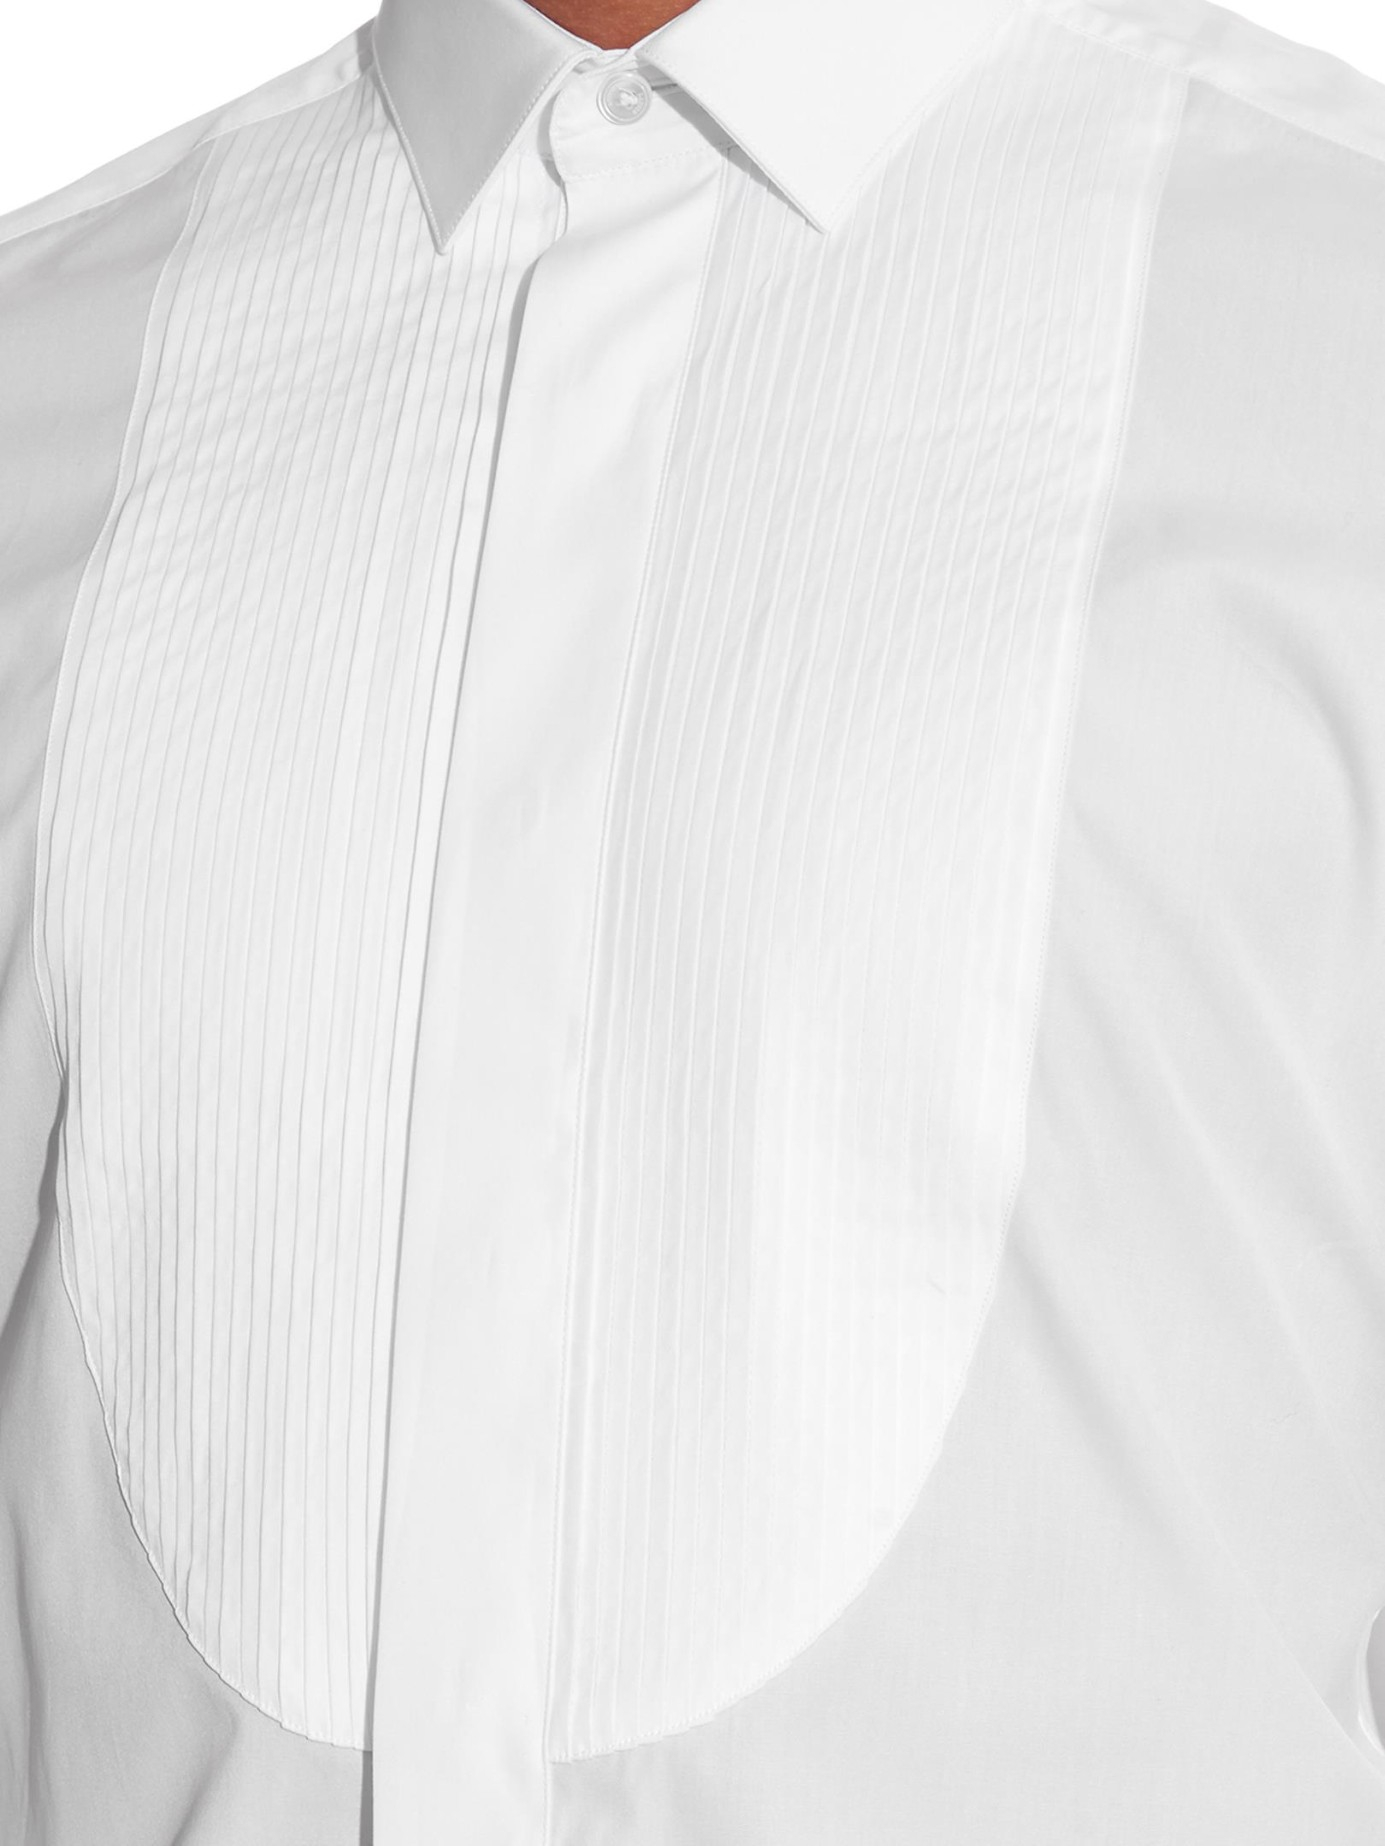 Lyst - Lanvin Pleated Bib-front Cotton Shirt in White for Men